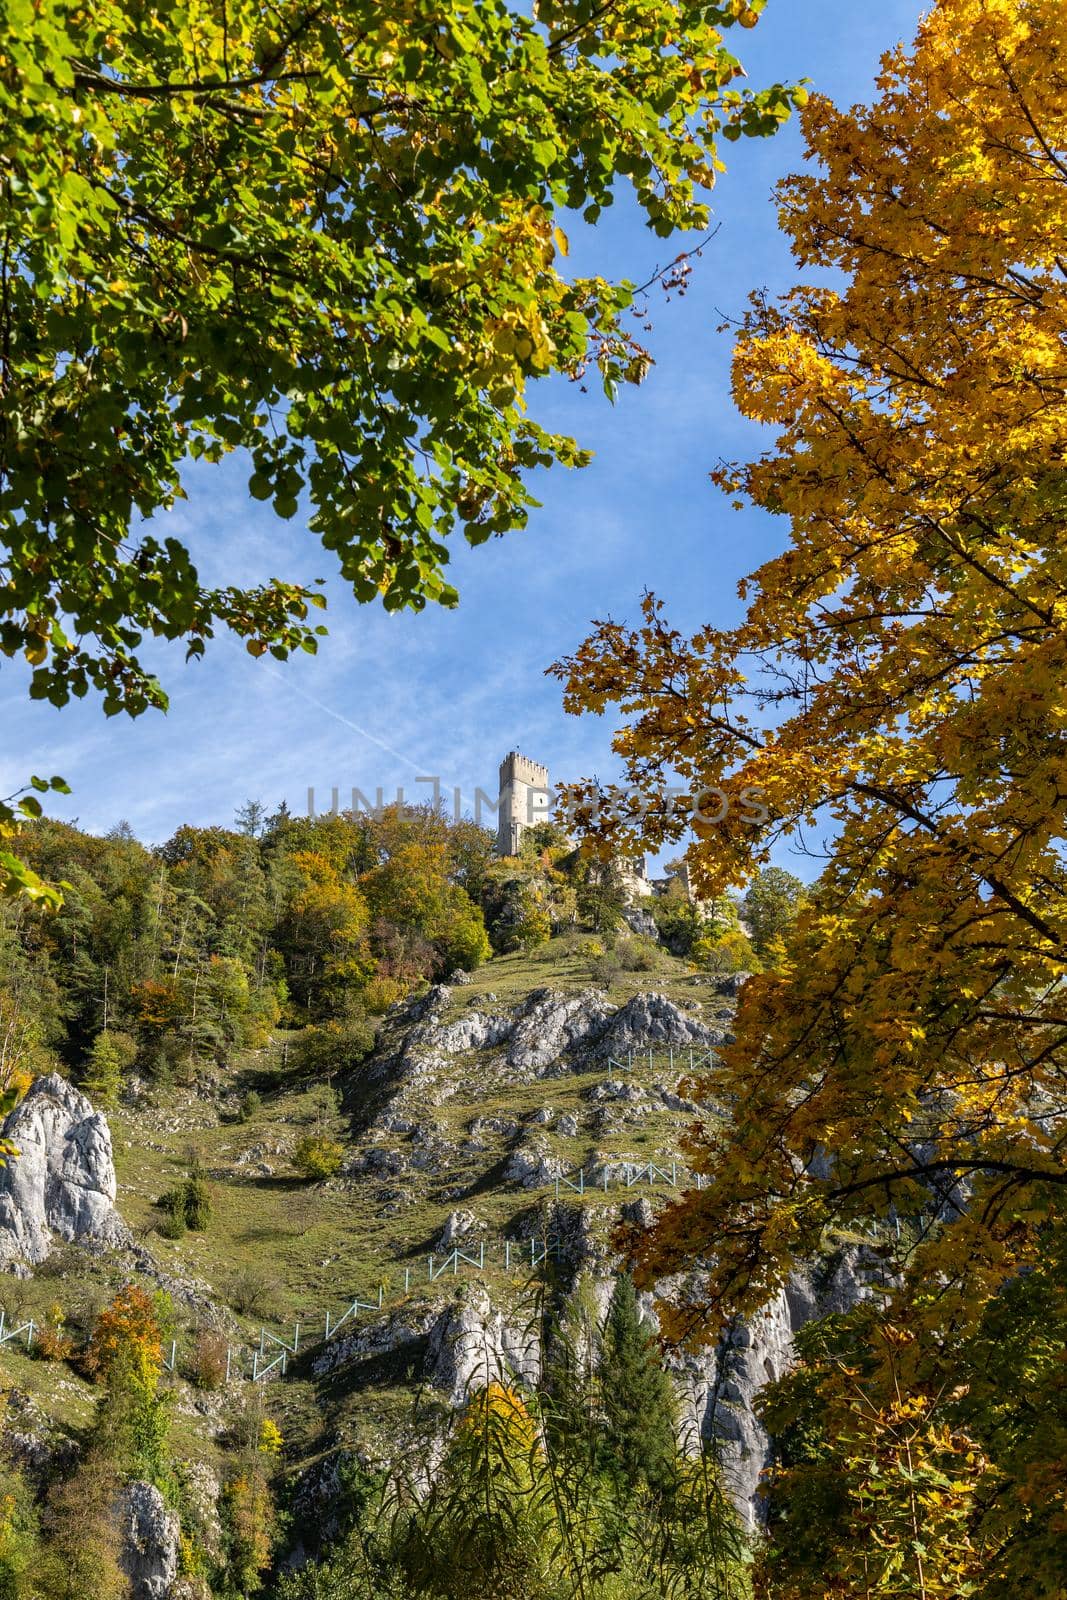 The ruin of Randeck castle in Markt Essing, Bavaria, Germany in autumn with multicolored tree in foreground by reinerc